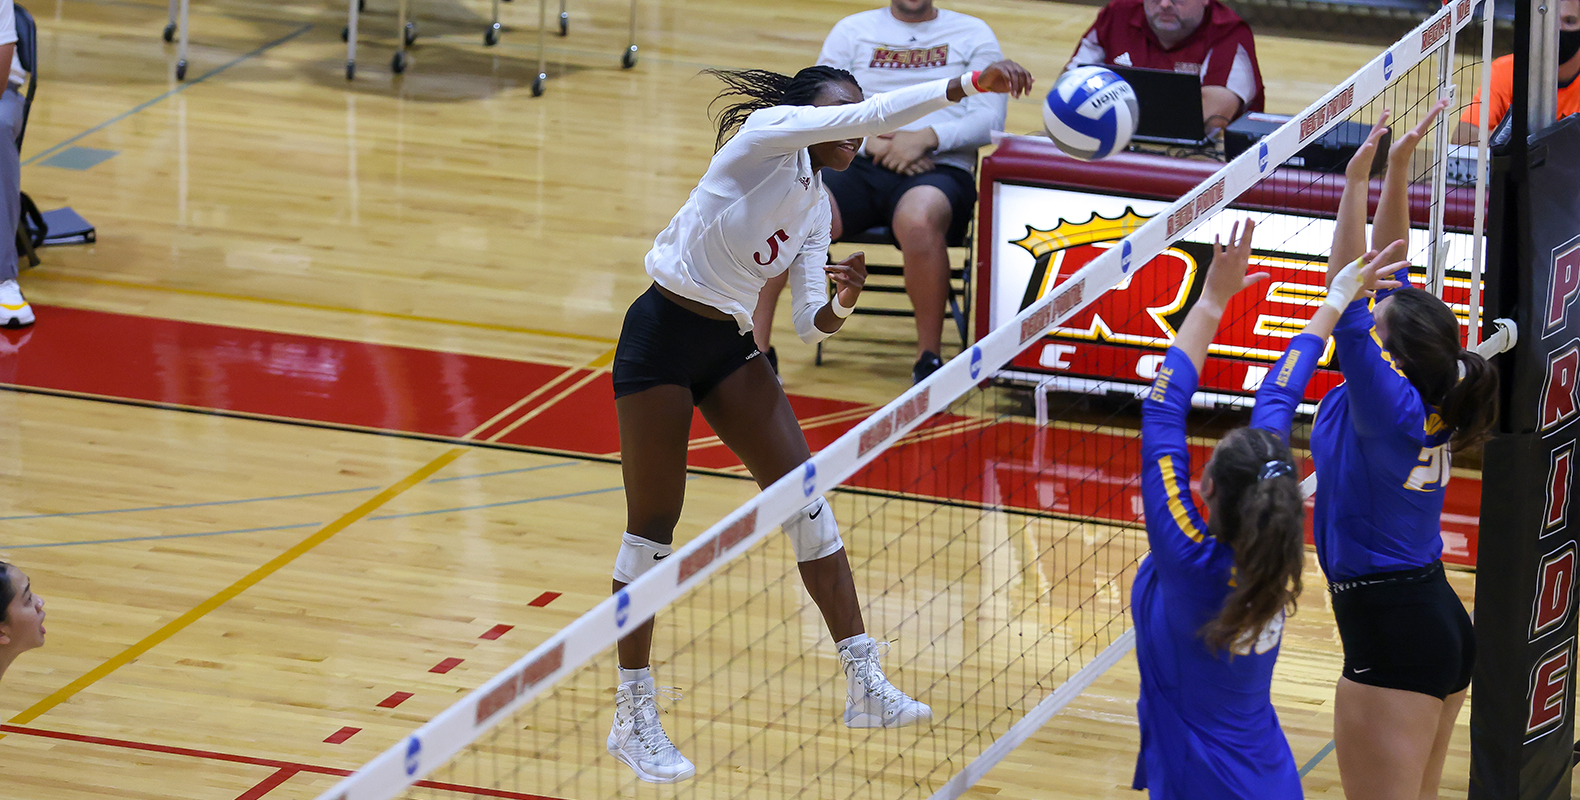 Regis Women’s Volleyball Splits Friday Contests at Bonnie May Invite